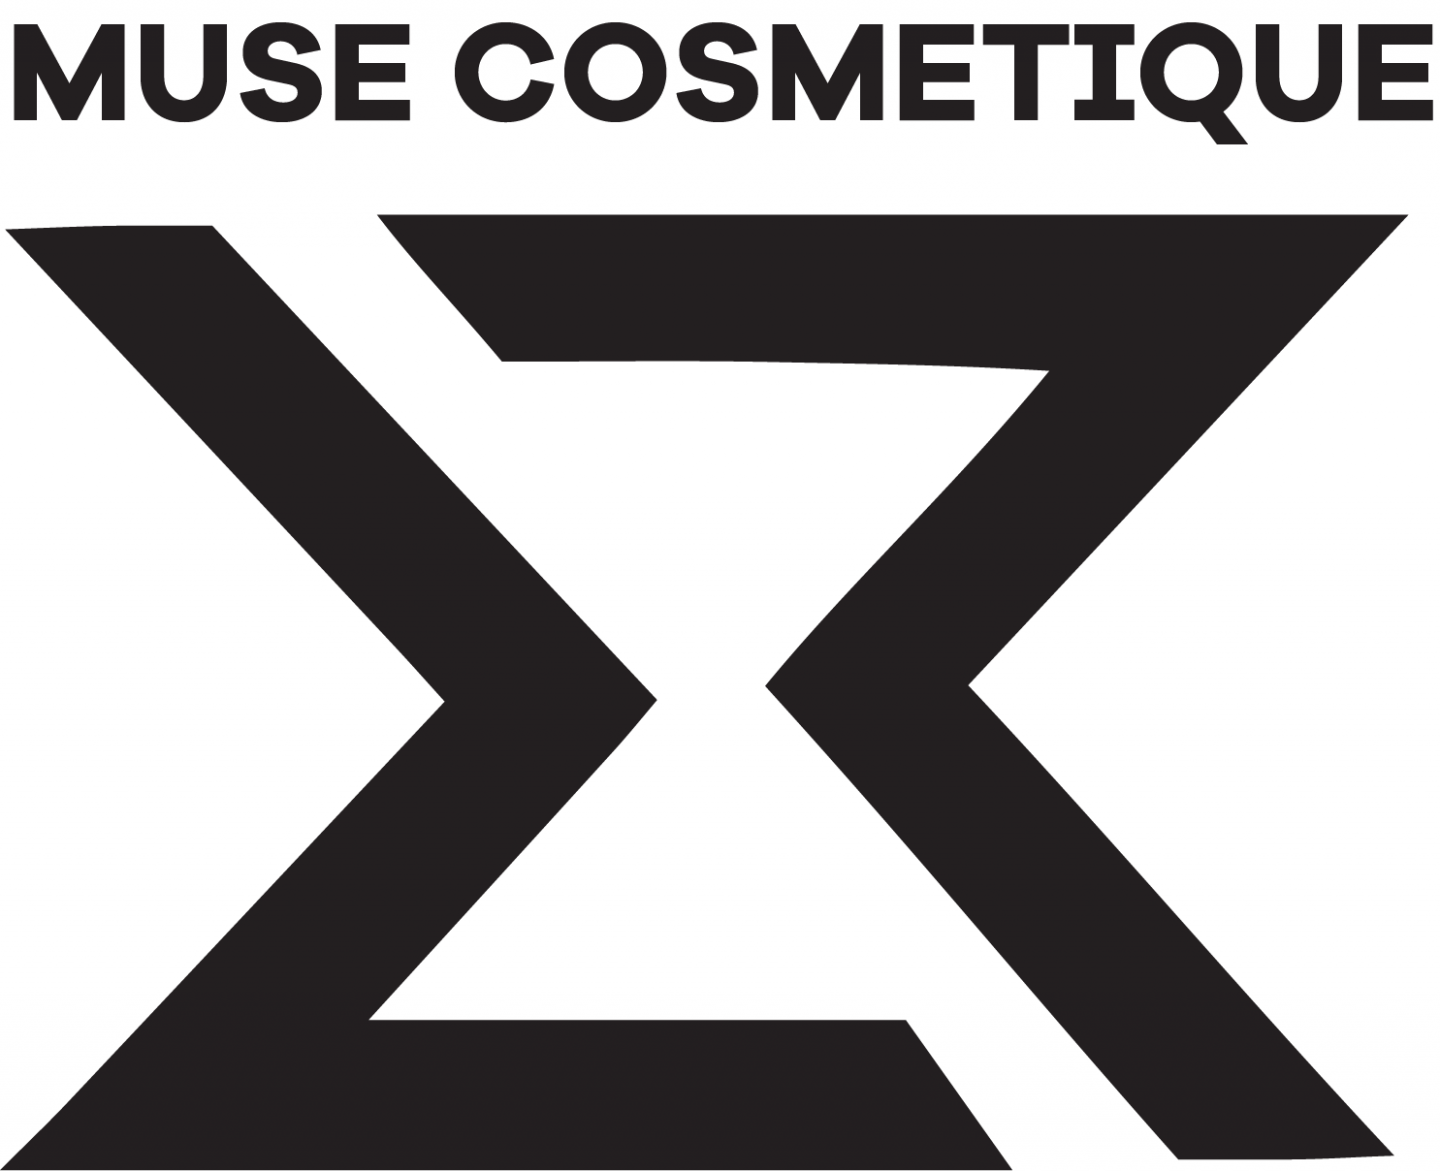 Muse Cosmetique